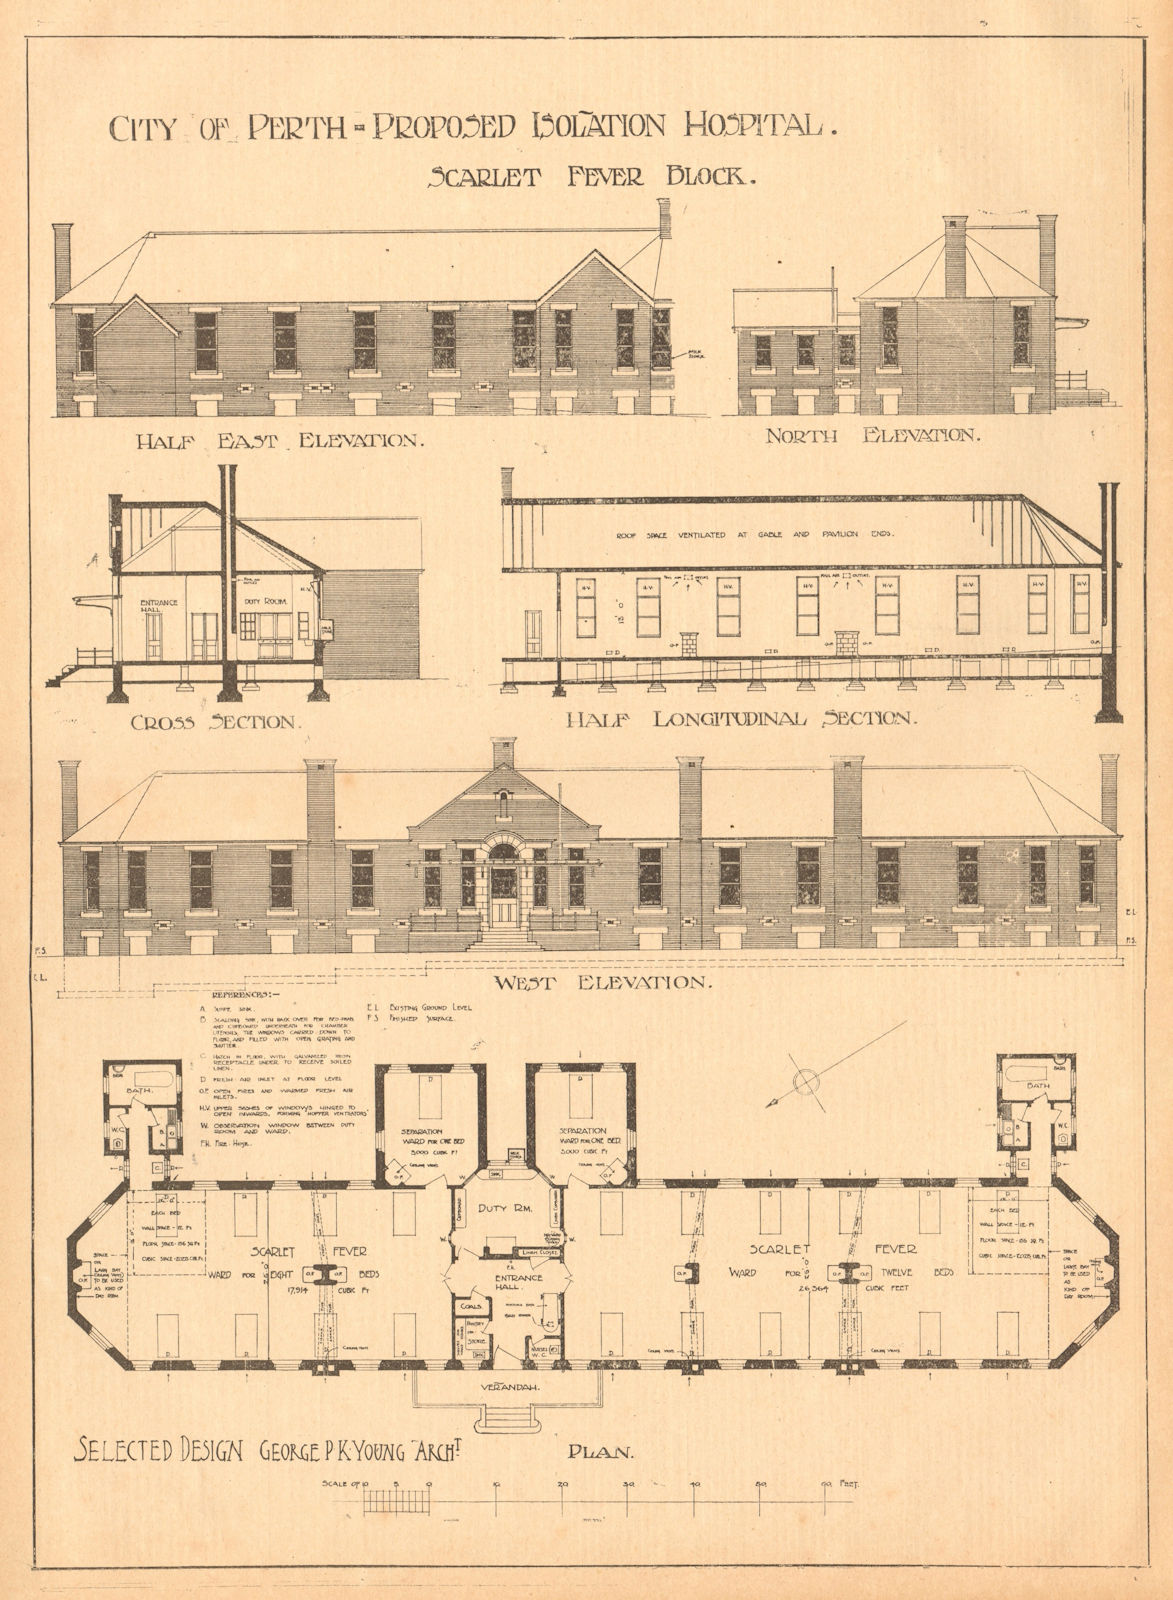 Perth. Proposed Isolation hospital Scarlet fever block. George Young, Archt 1904